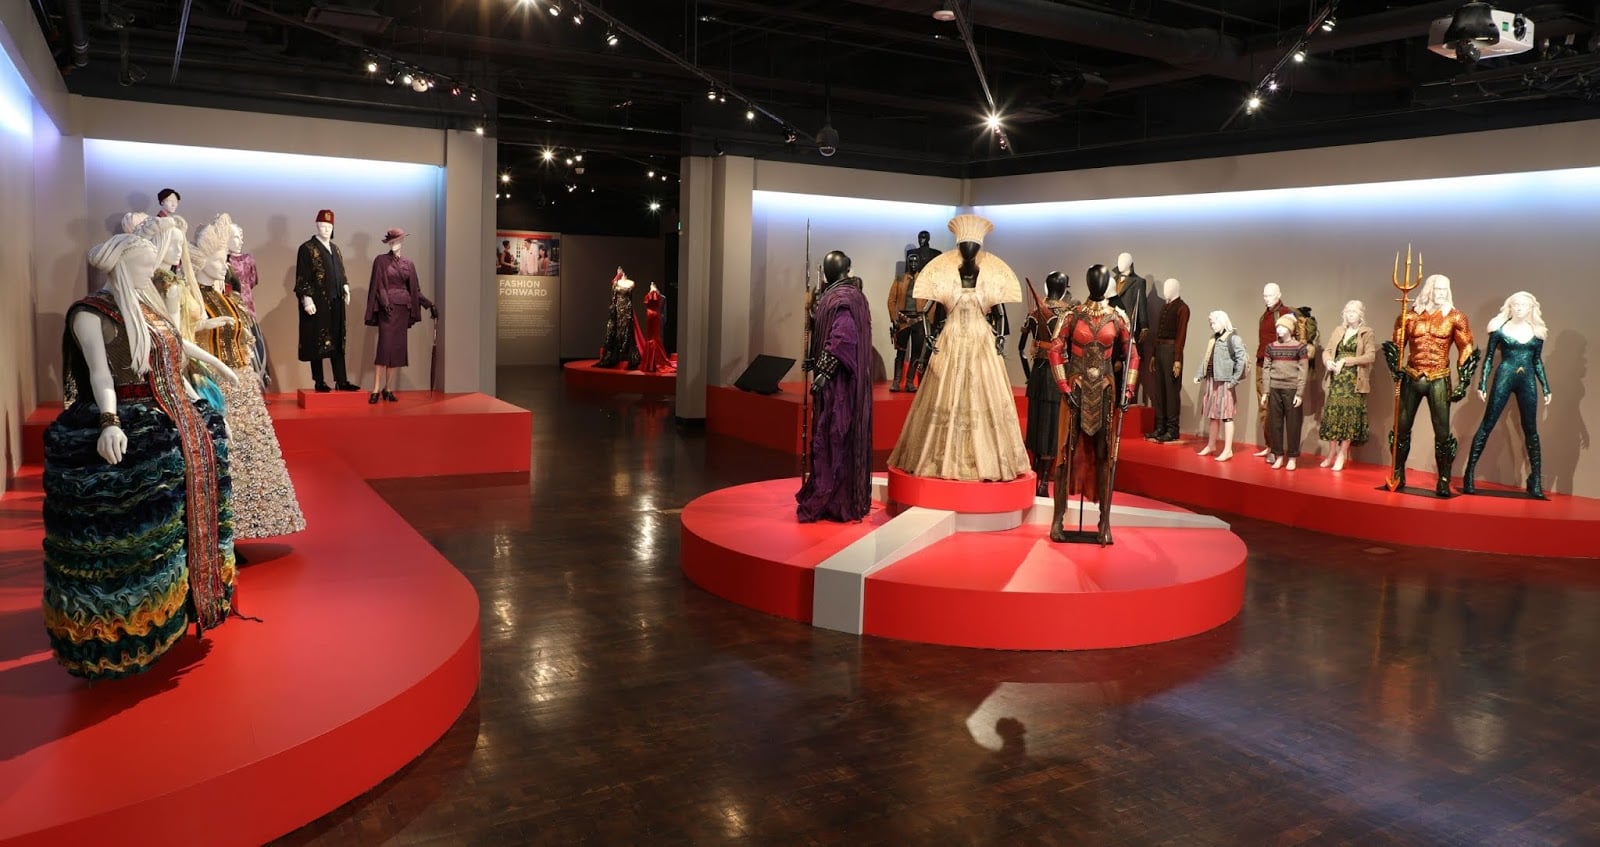 Christian Dior's New Look at the FIDM Museum - FIDM Museum